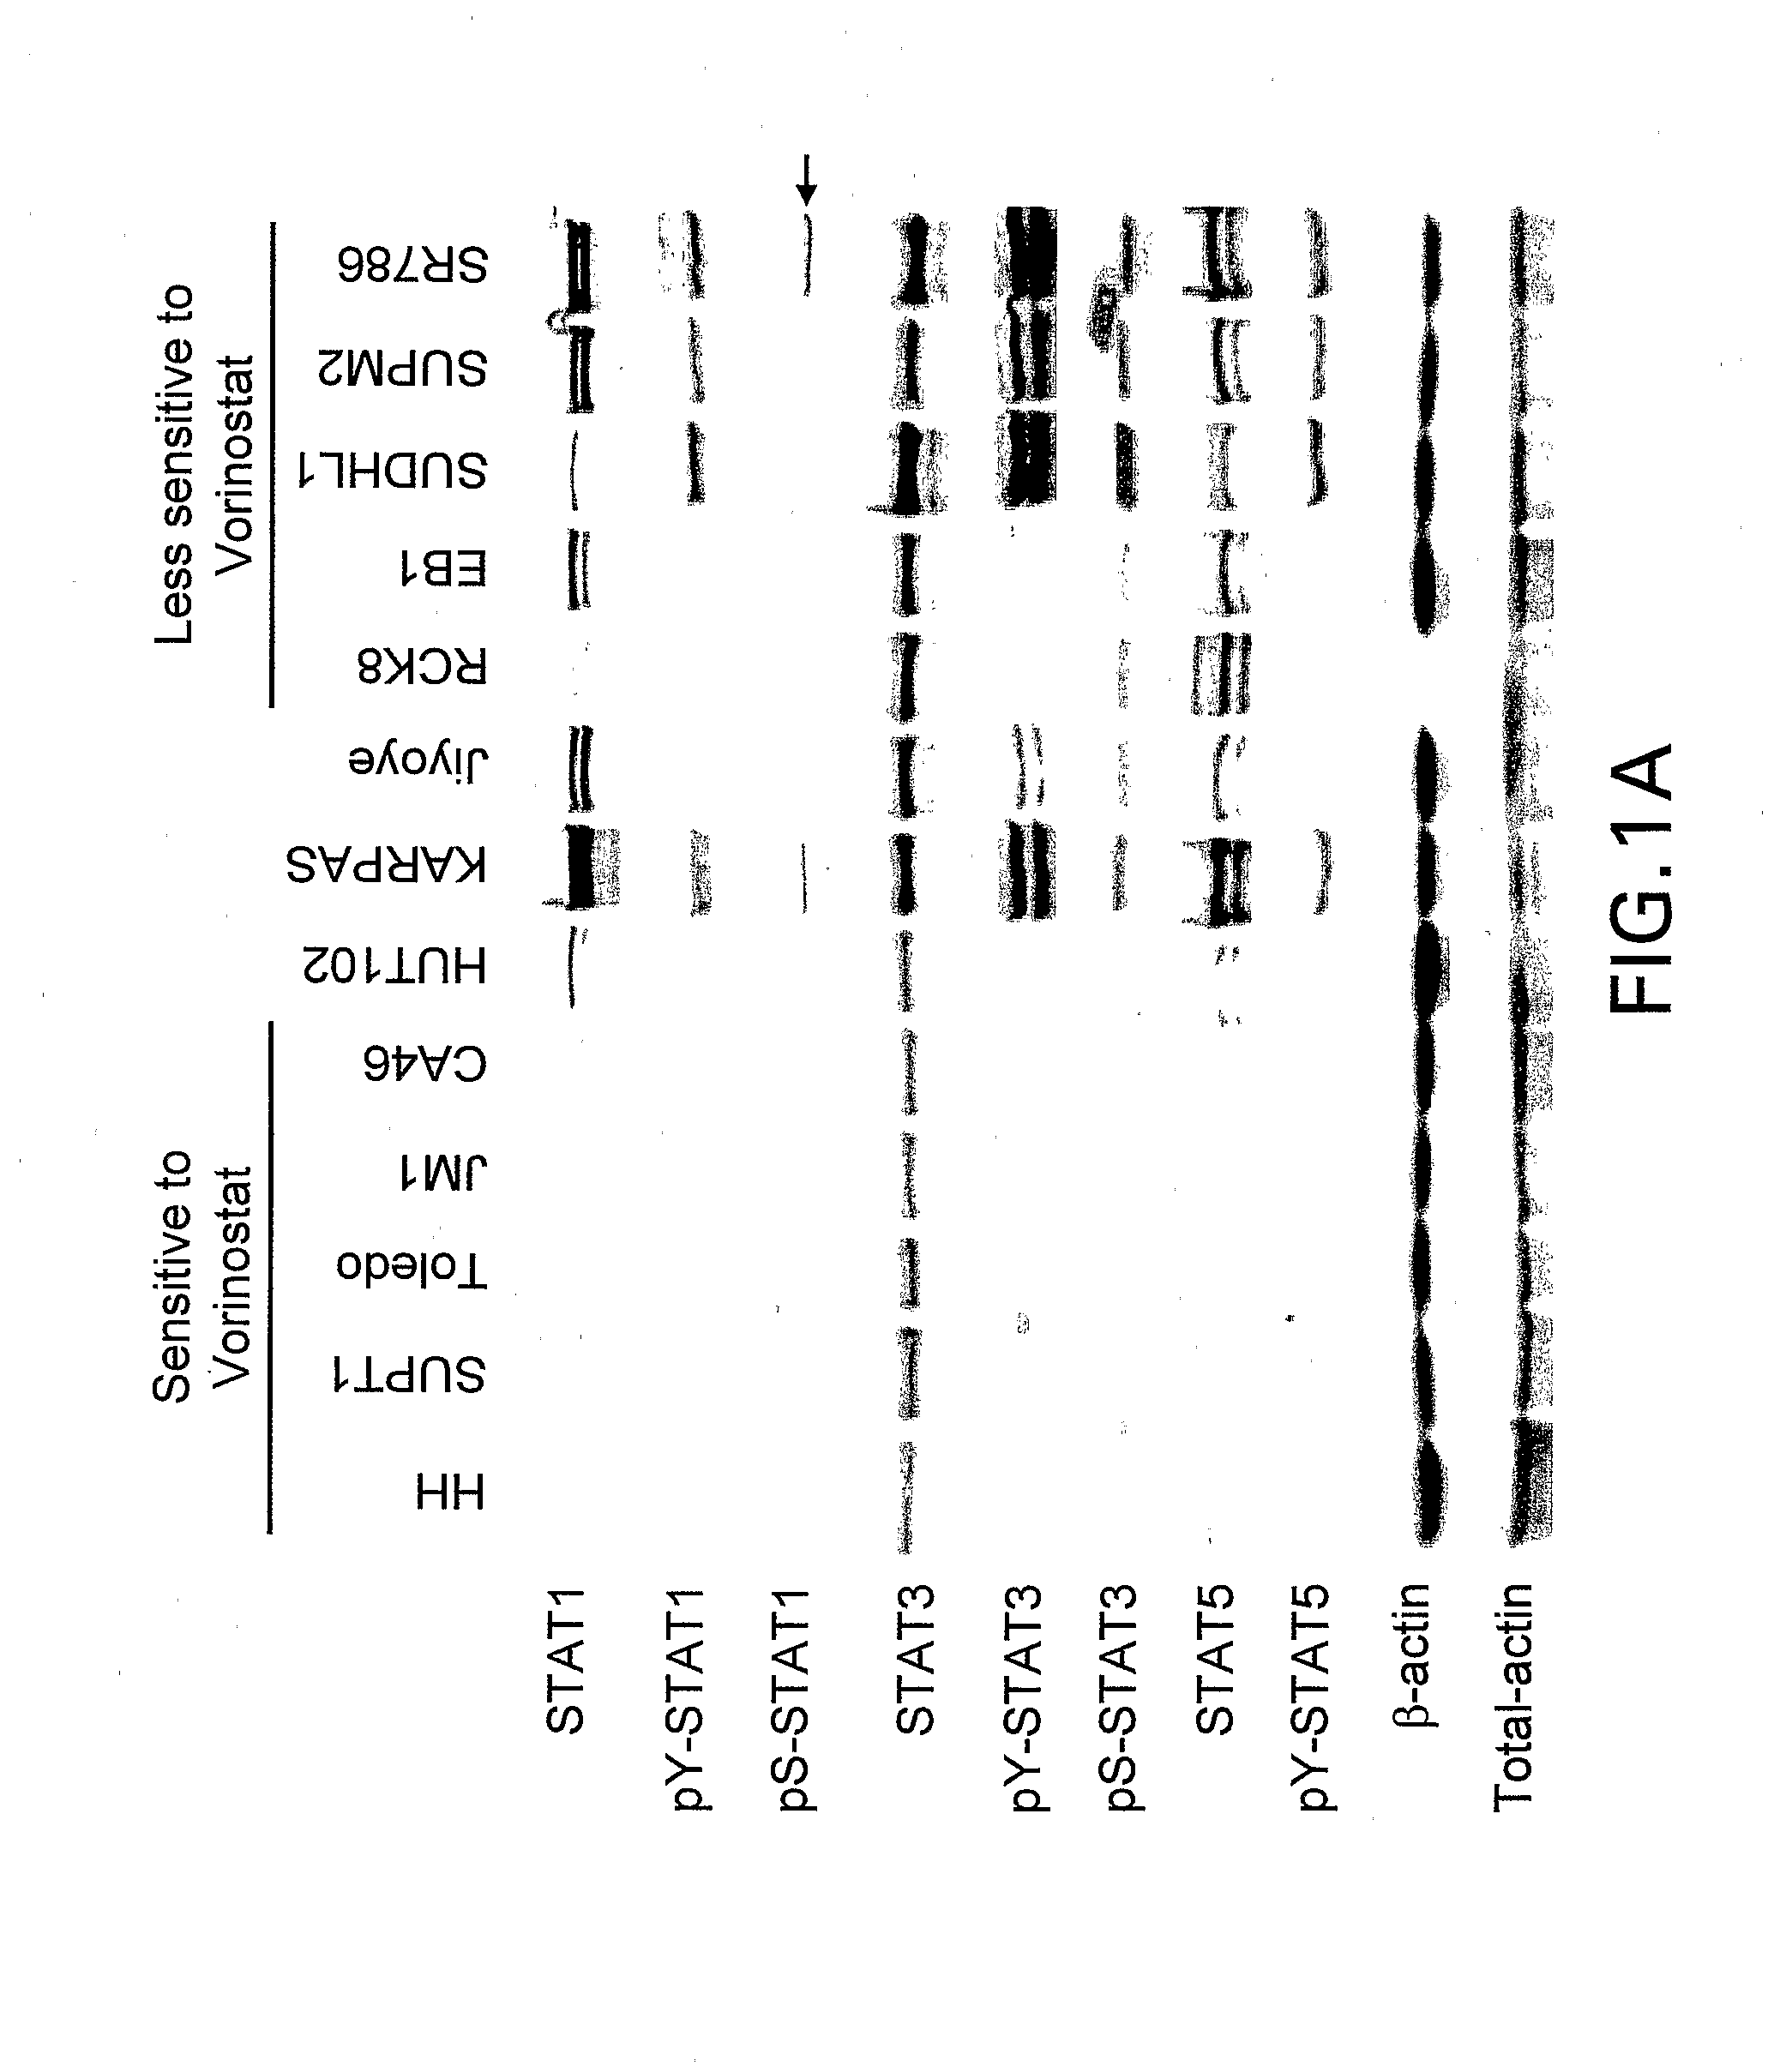 Methods for Predicting Treatment Response Based On the Expression Profiles of Protein and Transcription Biomarkers